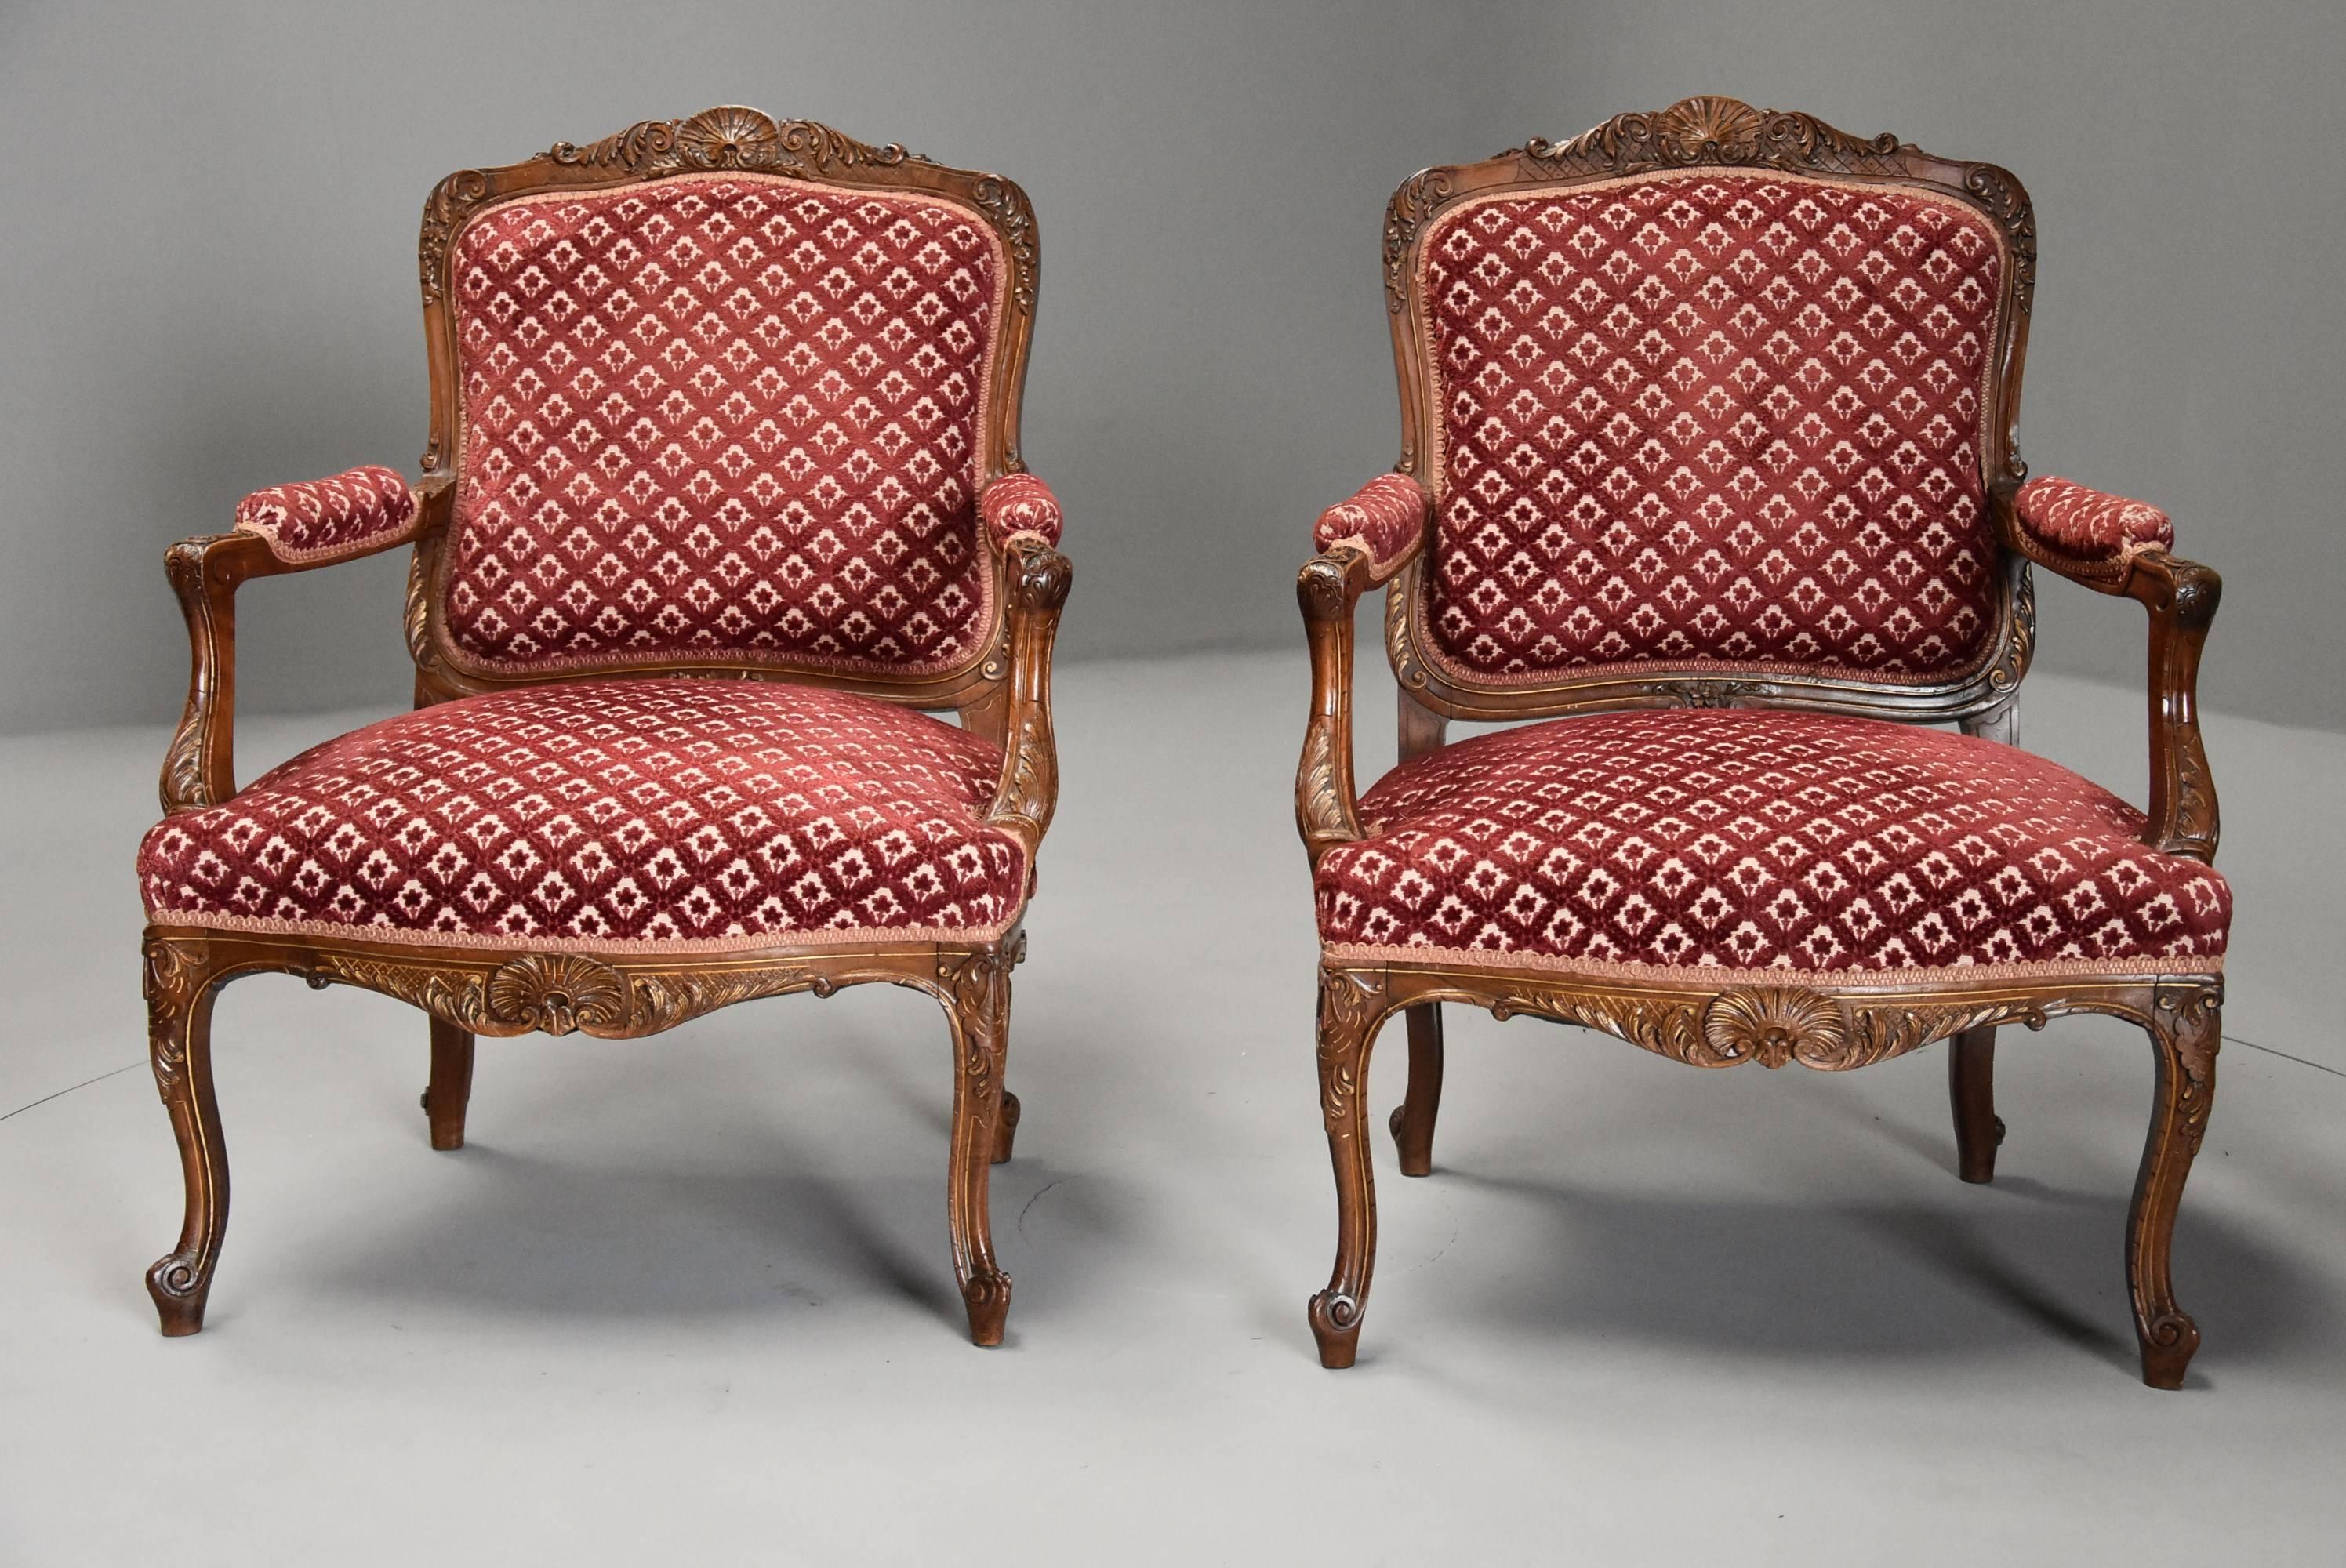 A late 19th century pair of French walnut fauteuils (open armchairs) in the Louis XV style with traces of orignal gilt.

This pair of chairs consist of a cartouche-shaped padded and upholstered back with carved central scallop shell decoration to